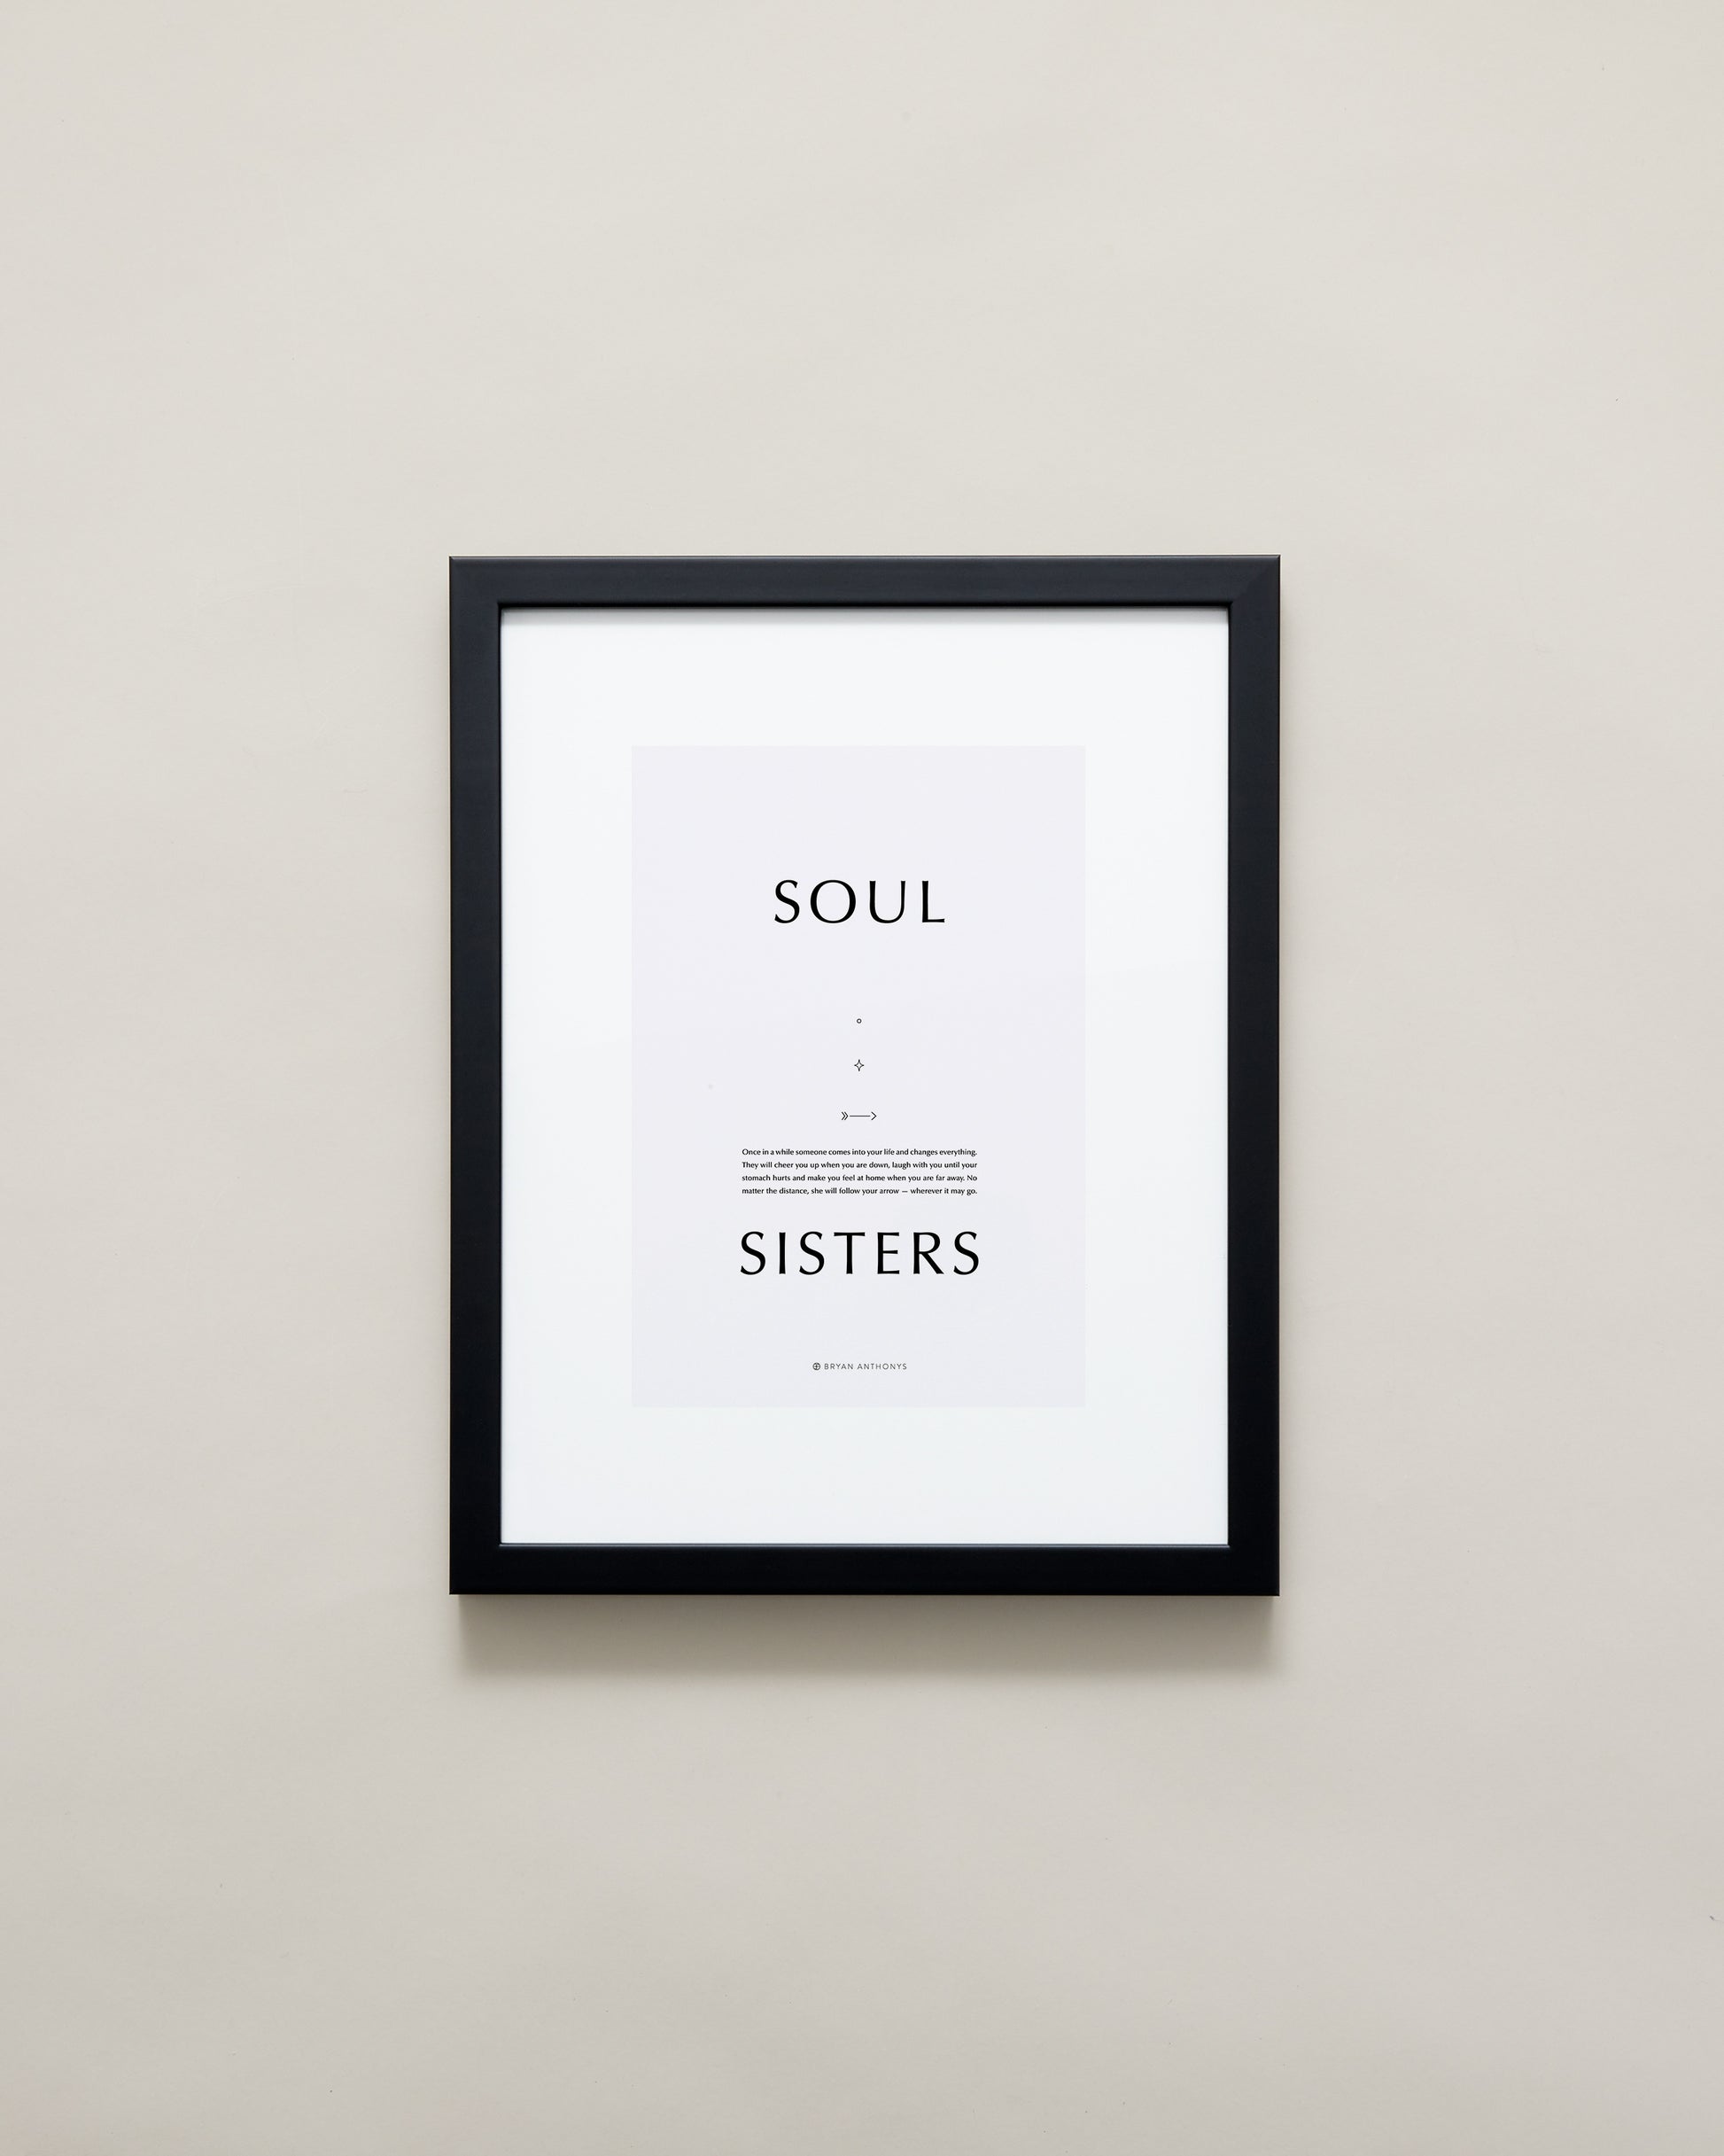 Bryan Anthonys Home Decor Purposeful Prints Soul Sisters Iconic Framed Print Gray Art with Black Frame 11x14